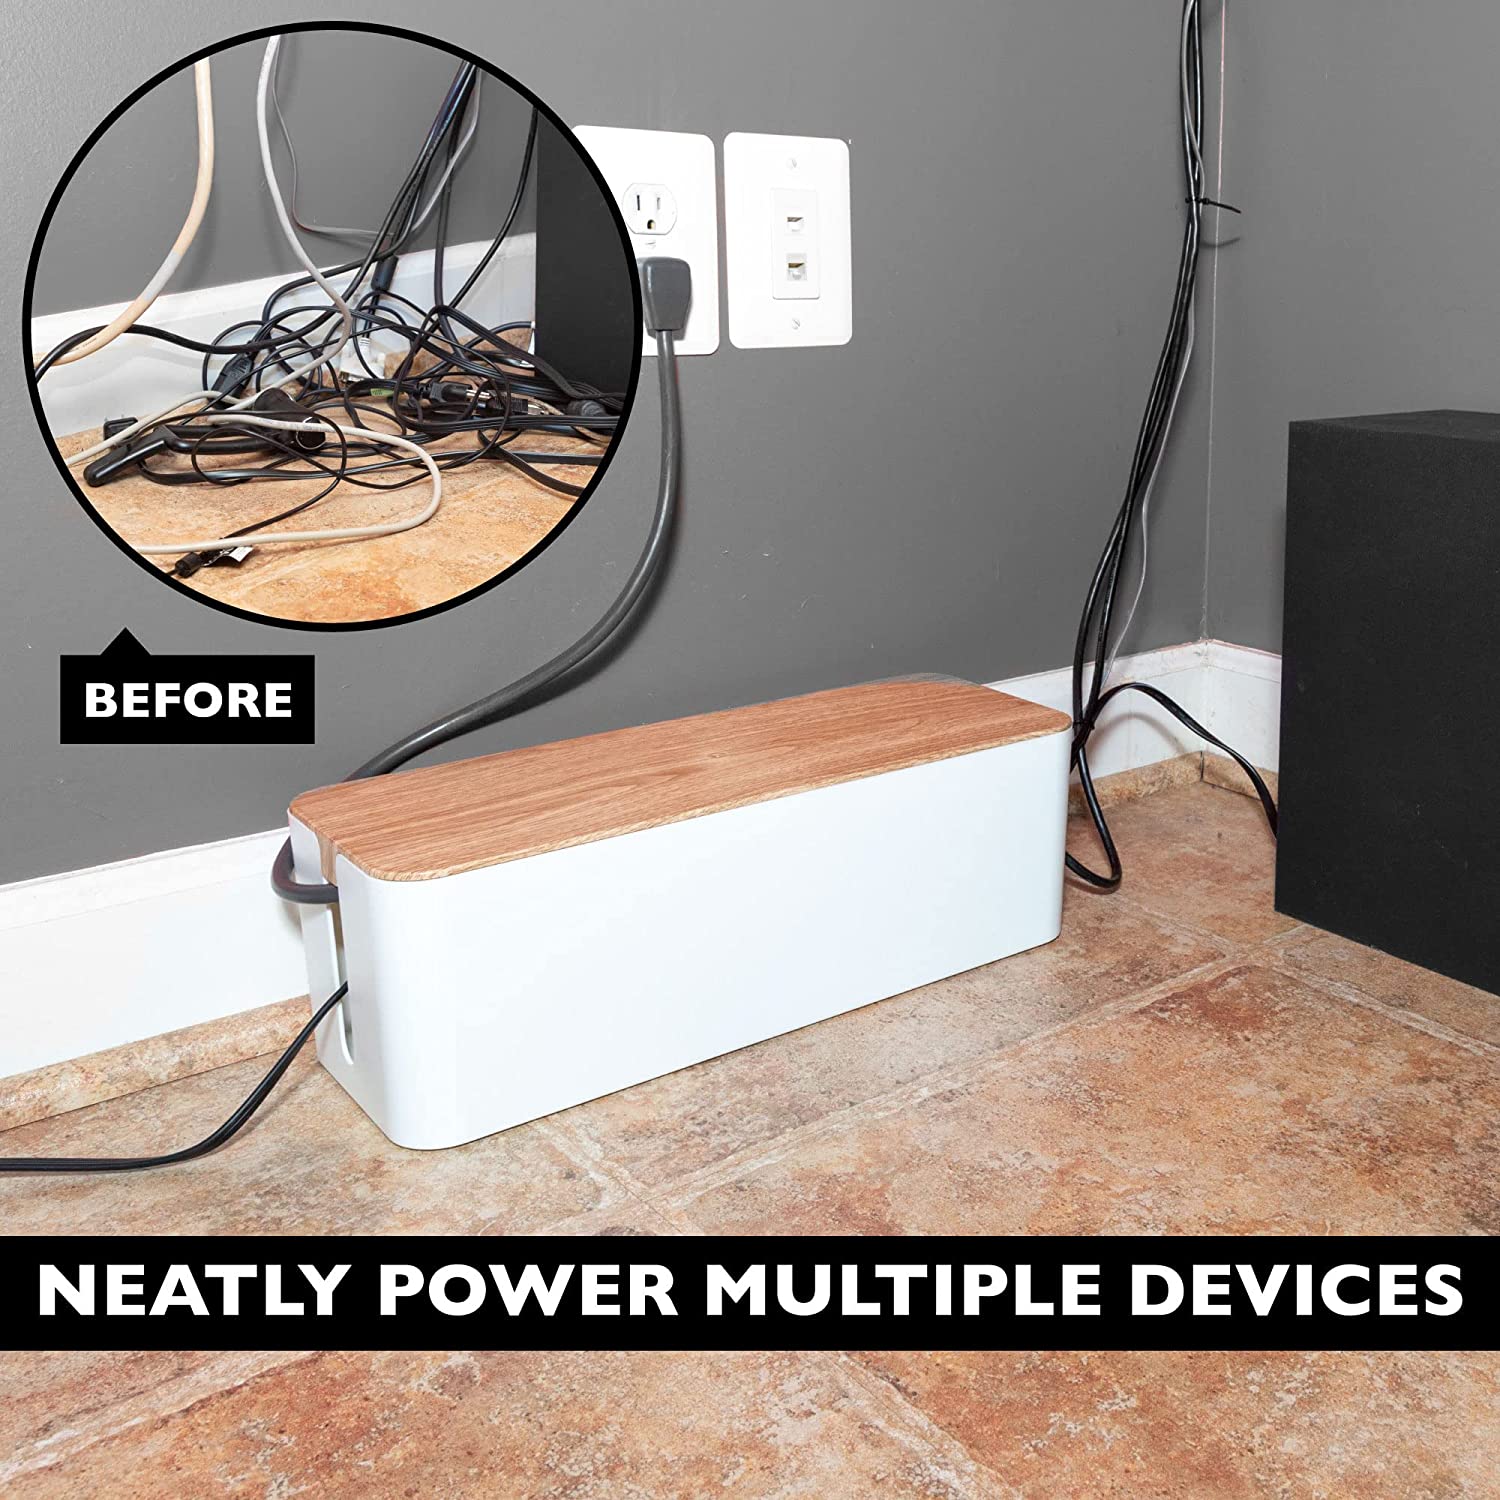 Cable Management Box - Cord Organizer for Wires, Power Strips